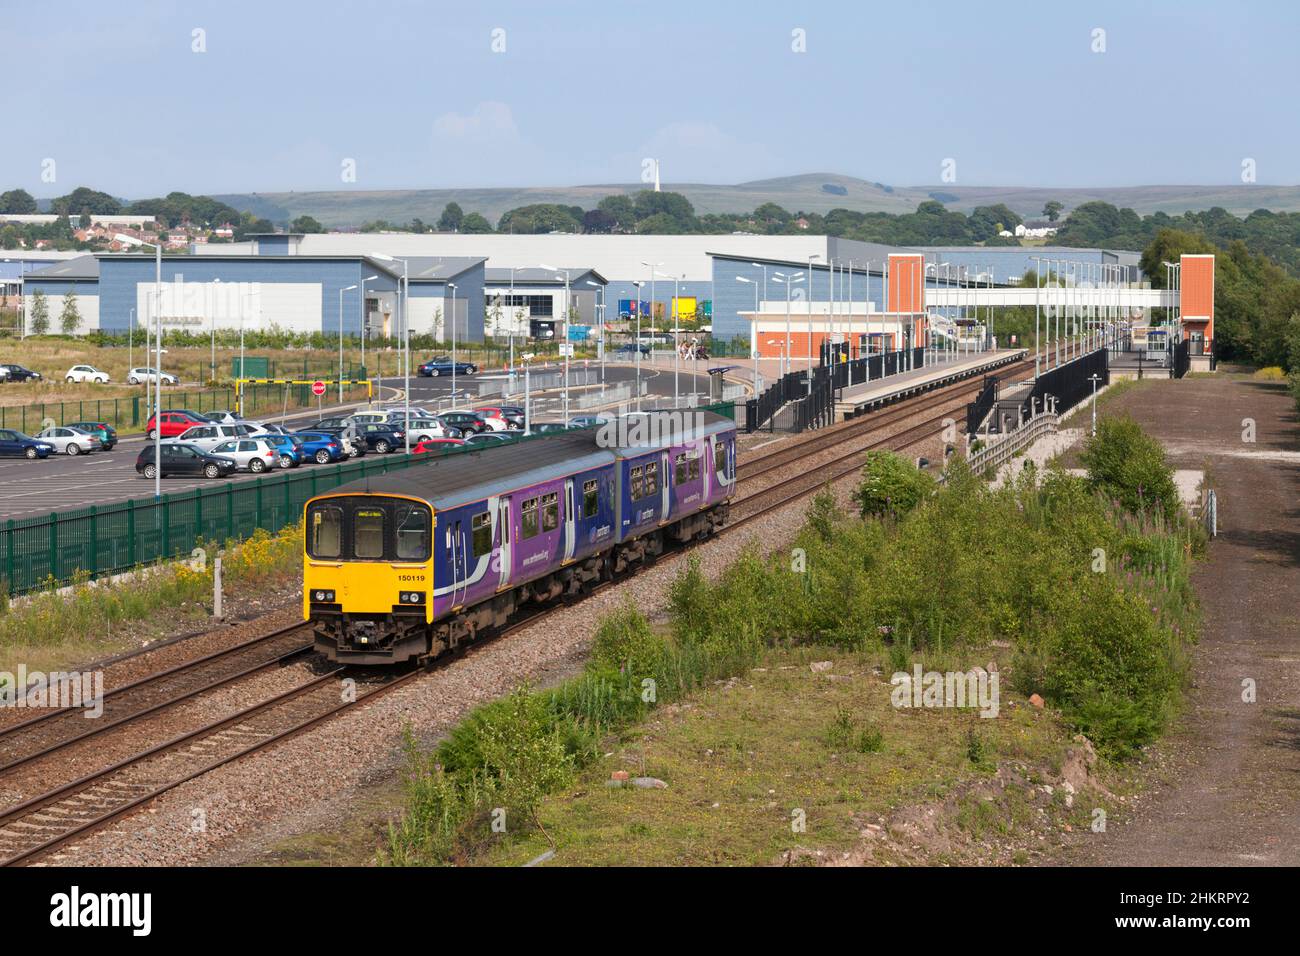 Northern Rail class 150 sprinter train 150119  at Buckshaw parkway railway station with a train diverted away from the mainline by engineering work. Stock Photo